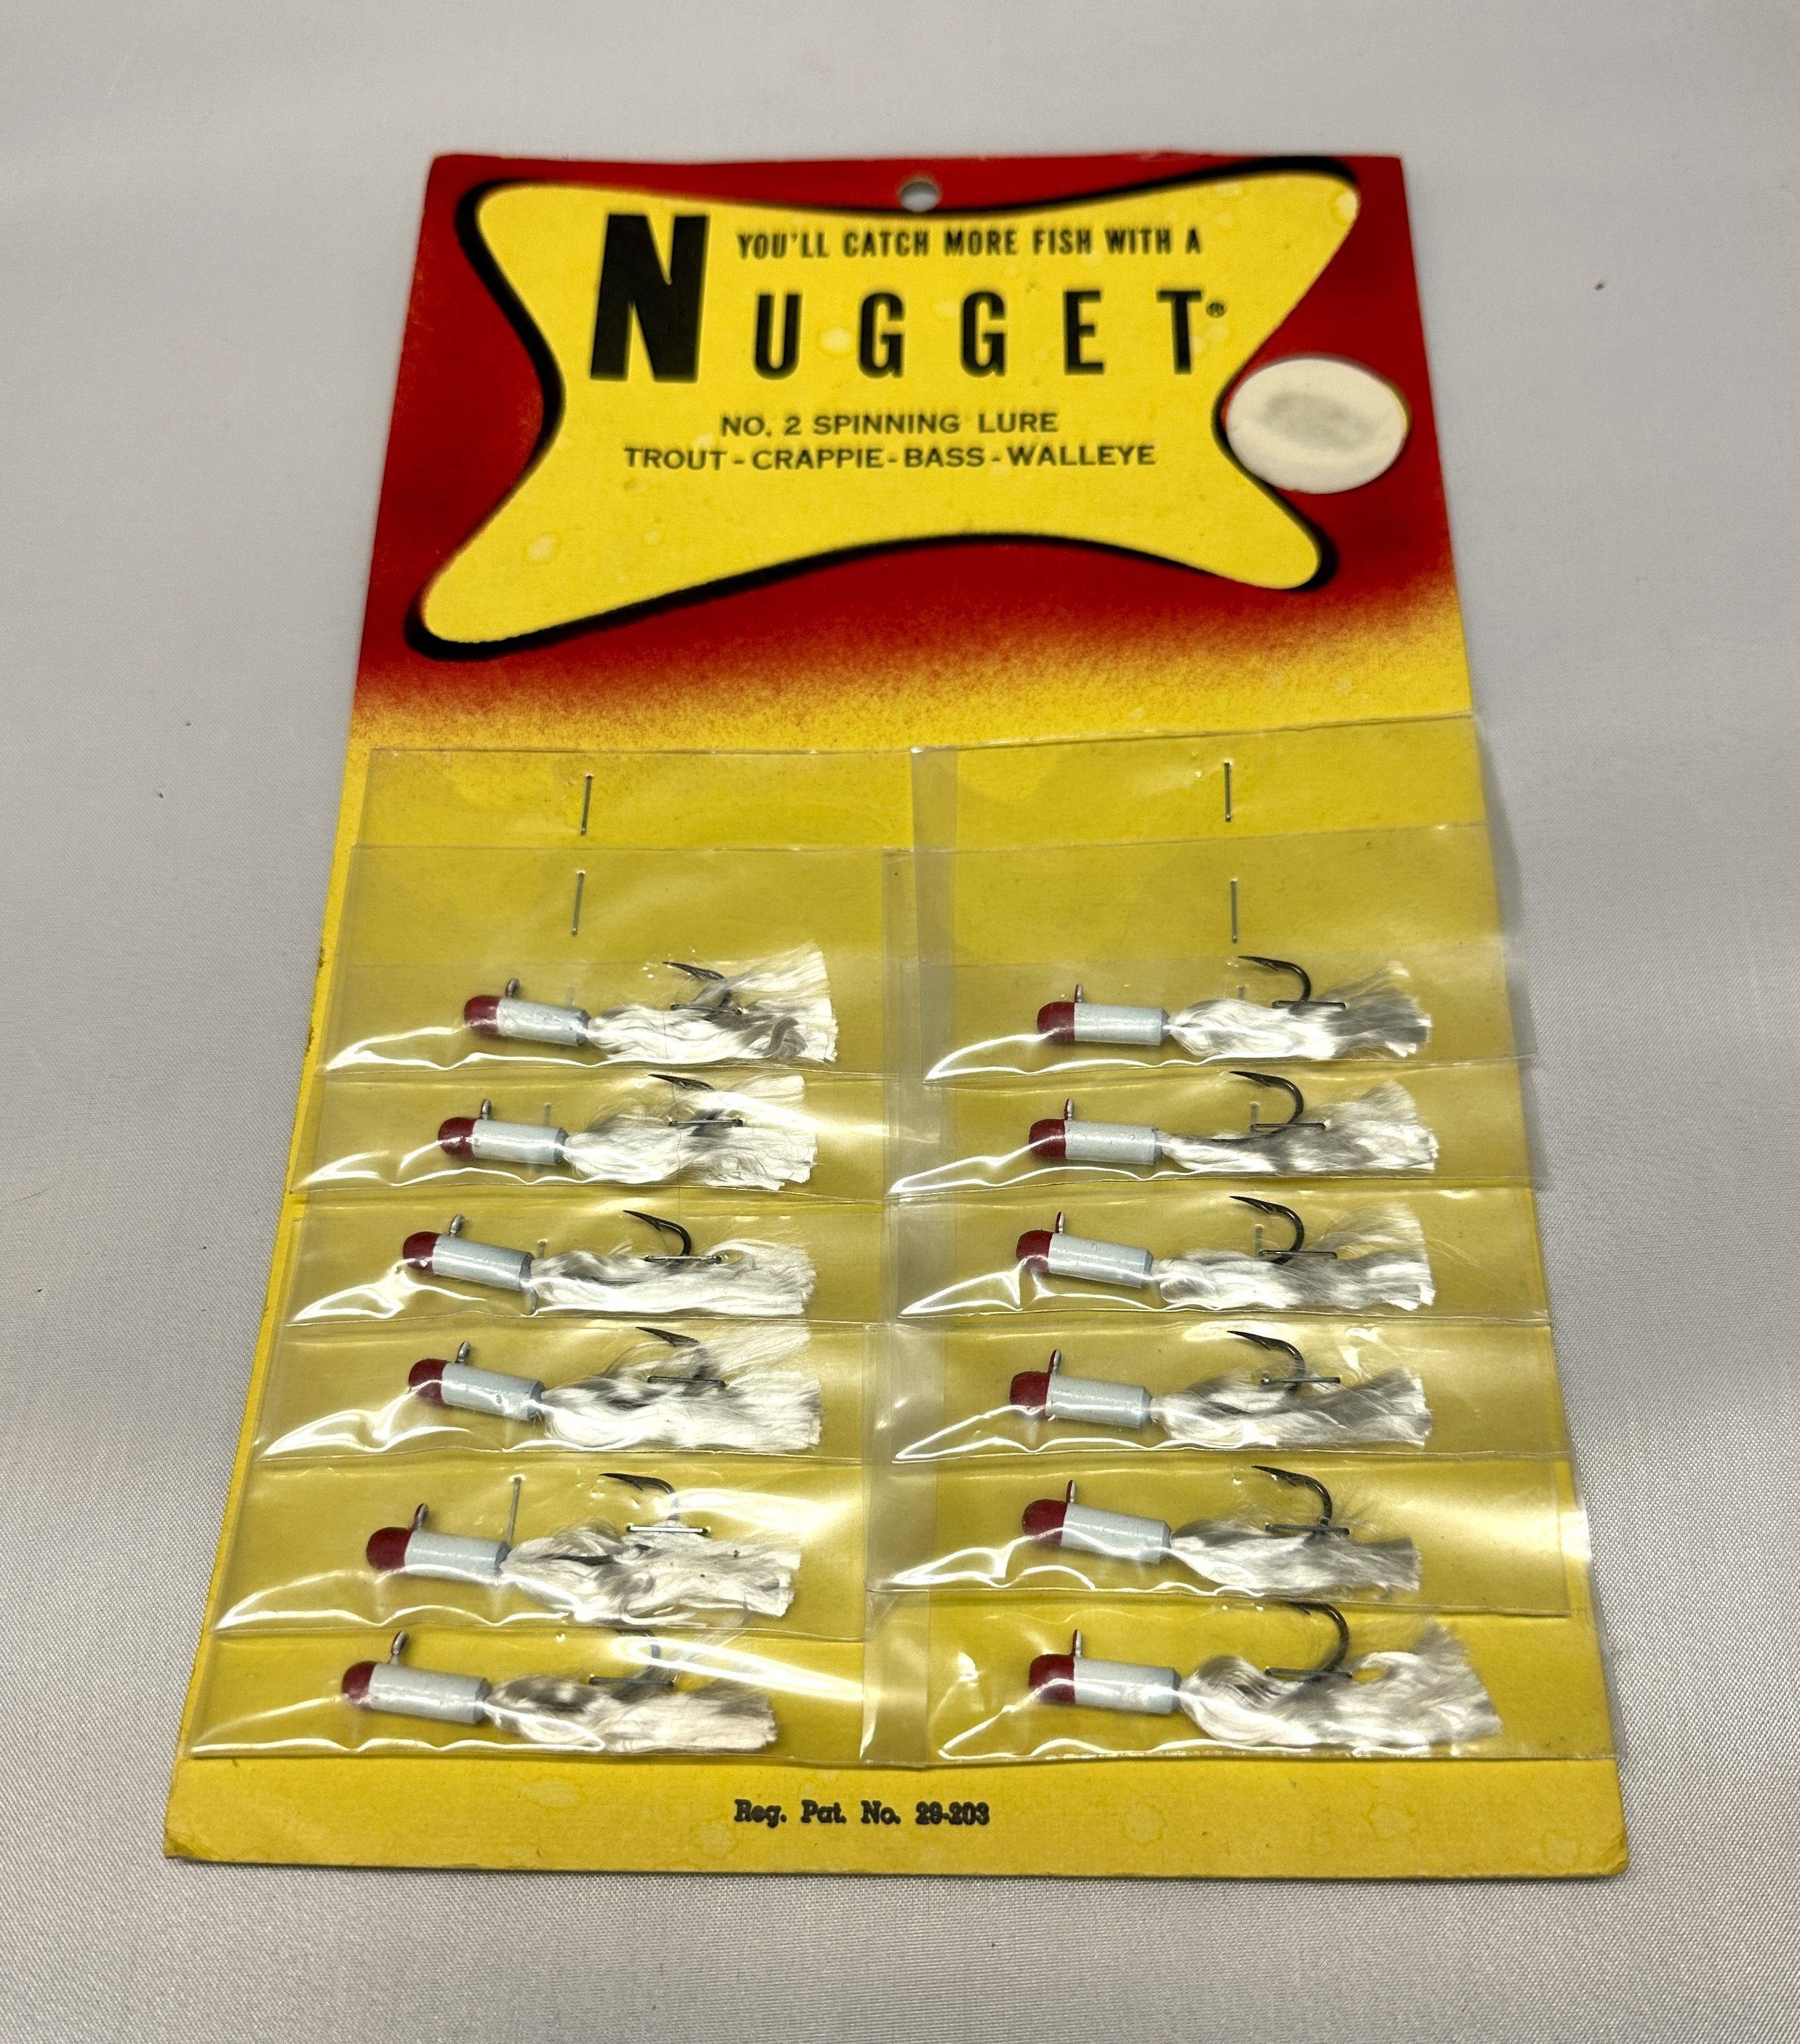 Sold at Auction: Vintage Display Board of Various Fly Fishing Lures